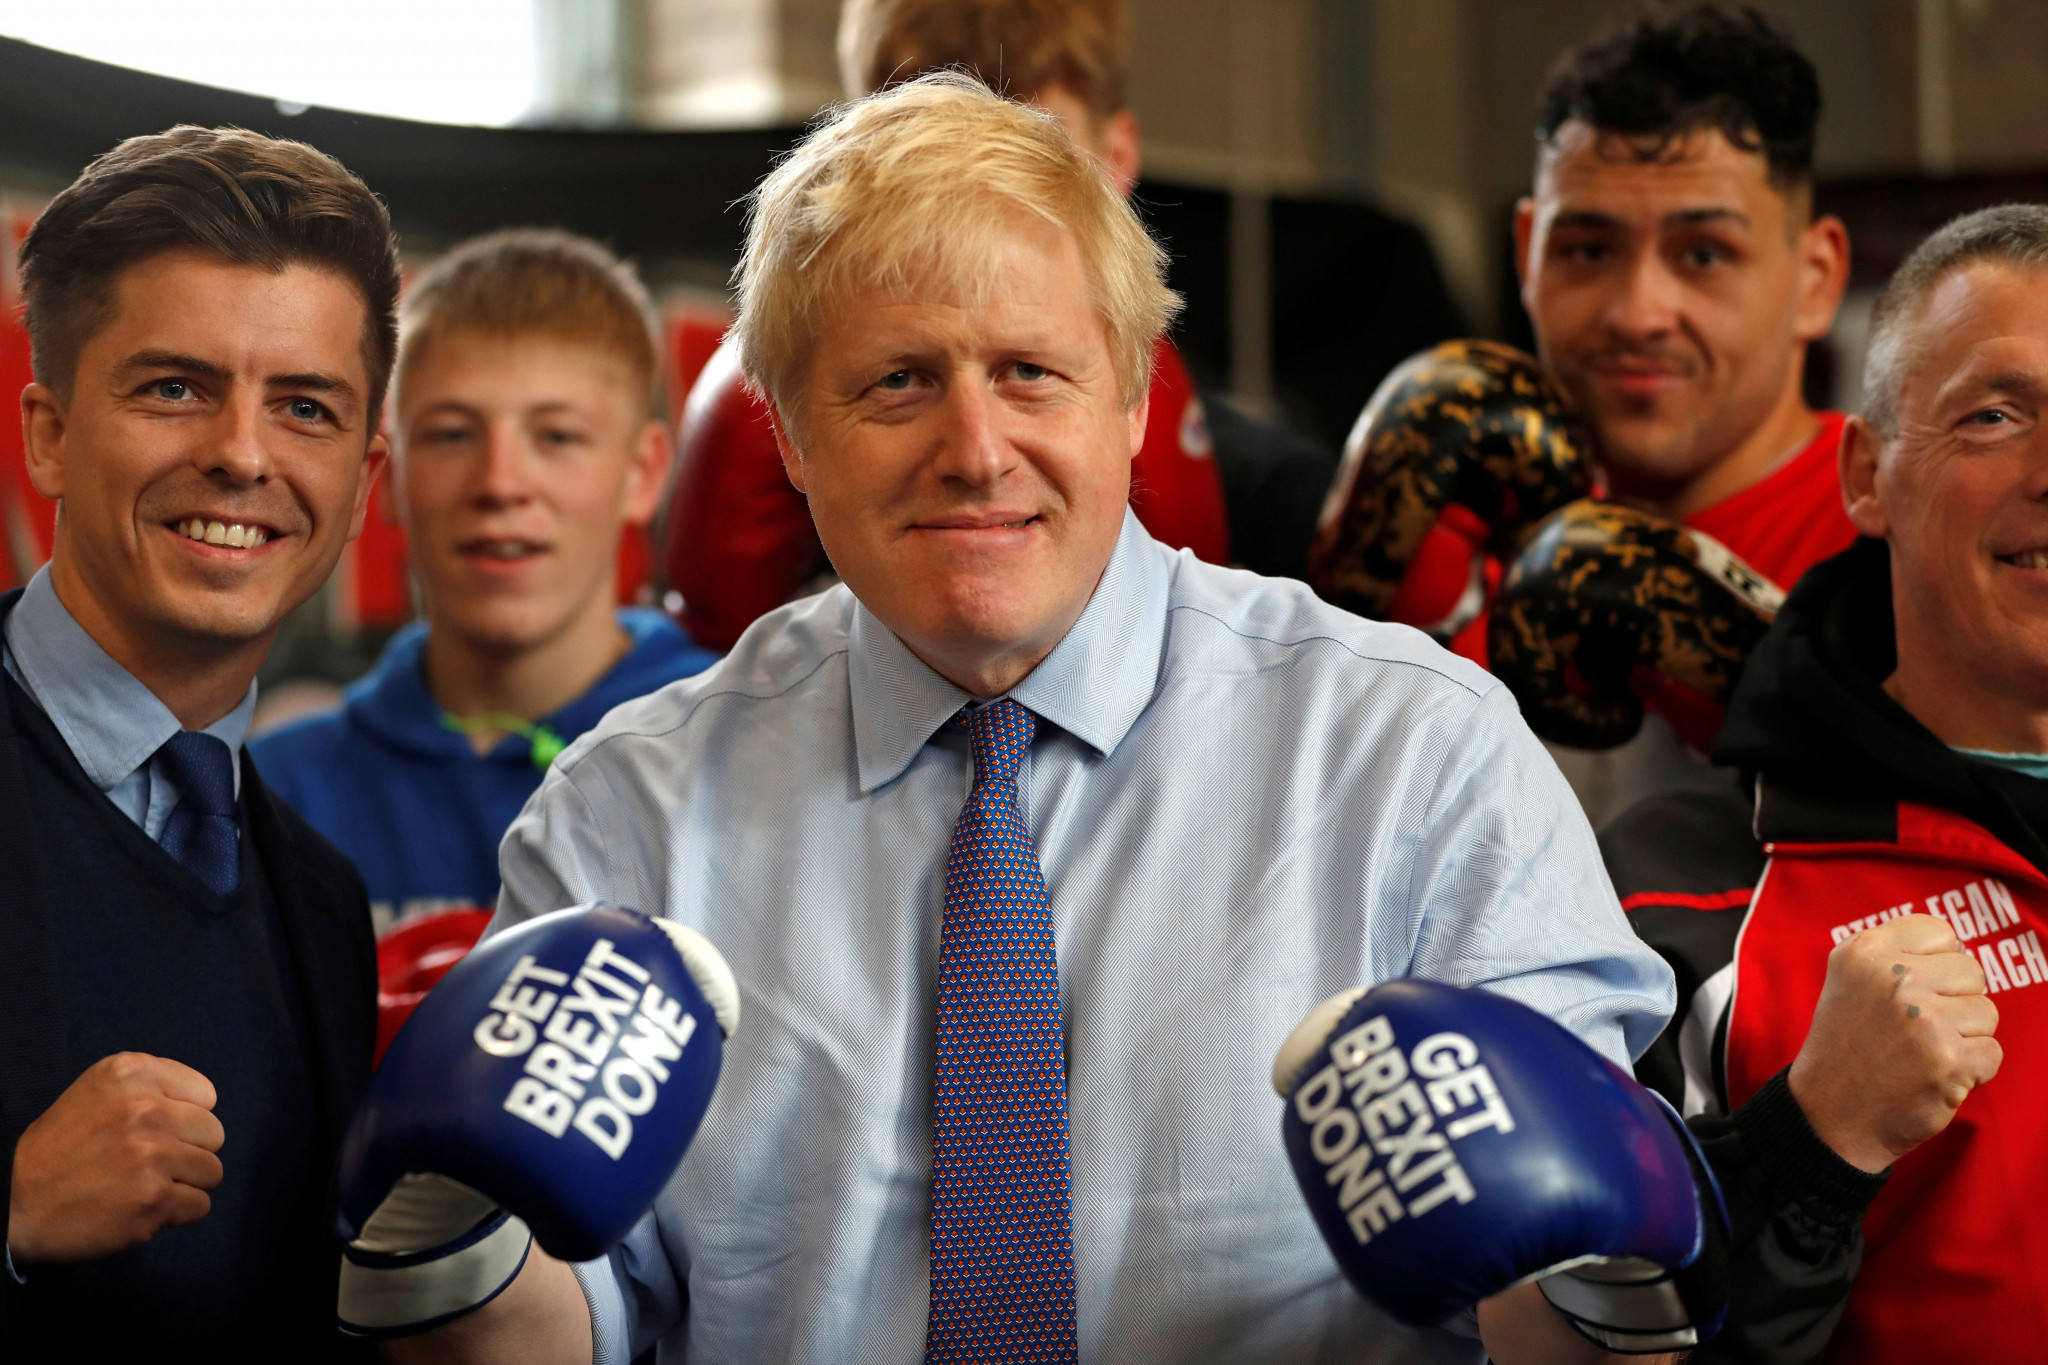 Boris Johnson doesn't know the names of many boxers, but claims to enjoy the sport ©Getty Images